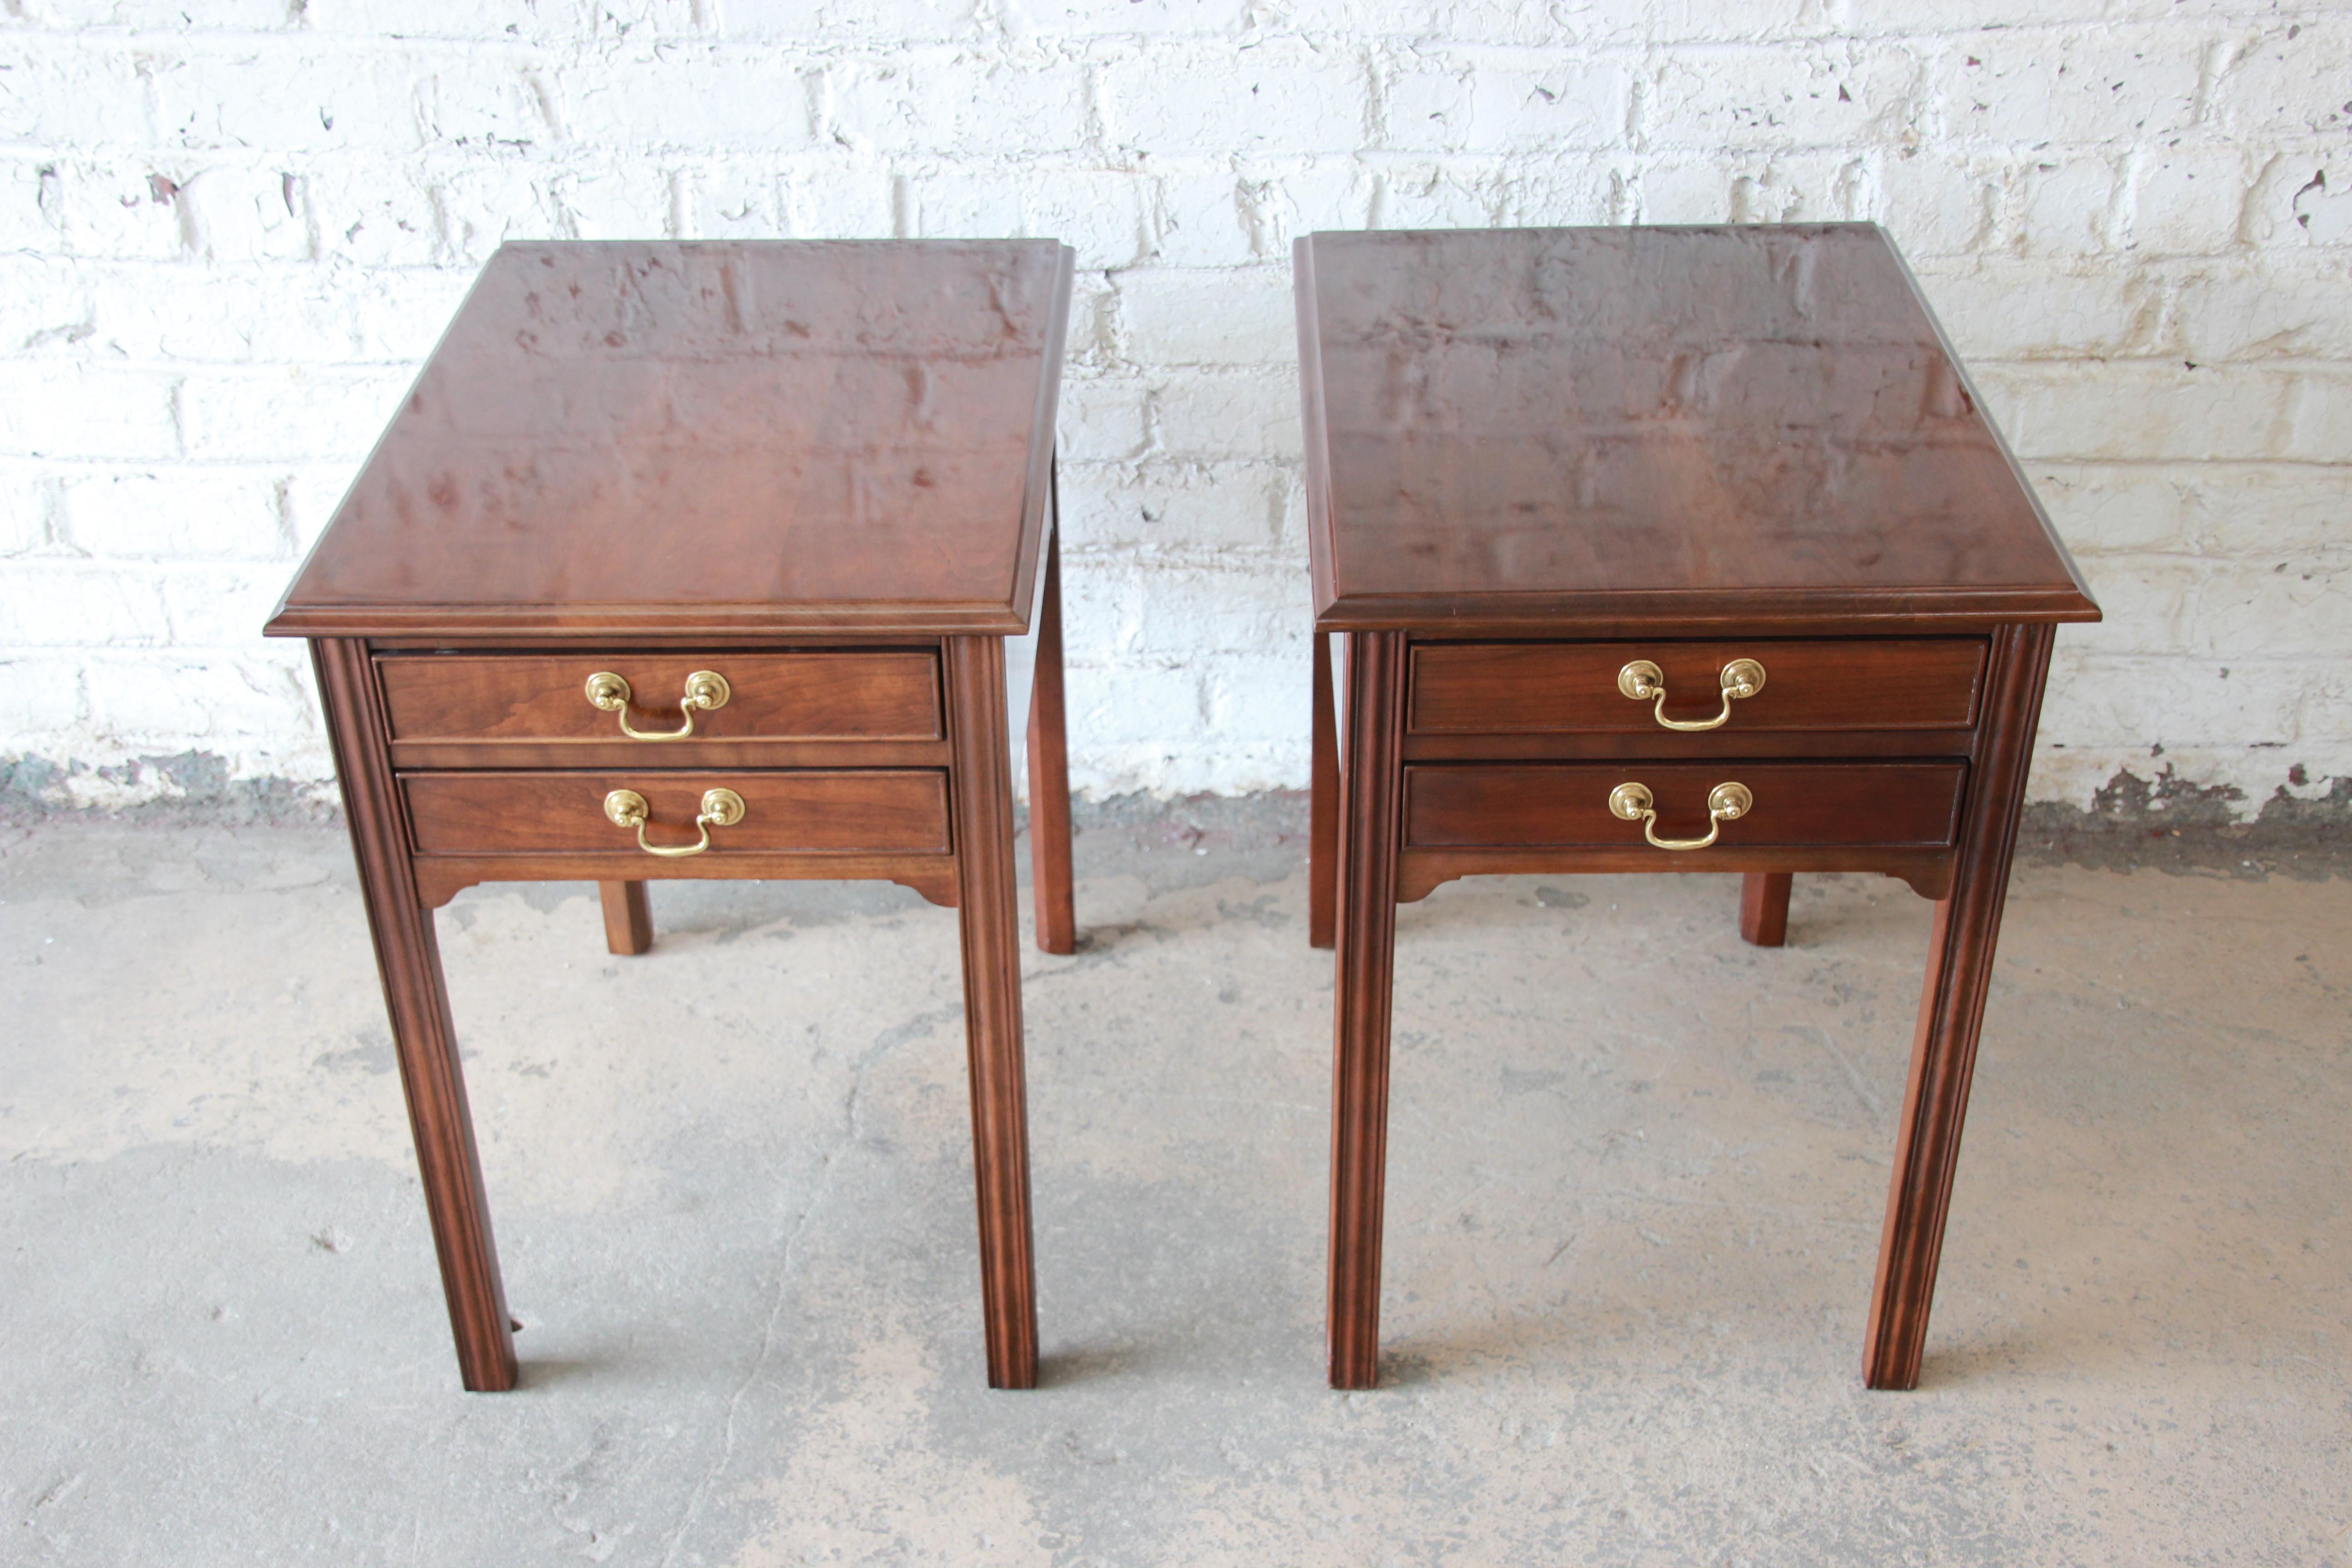 A gorgeous pair of solid cherrywood nightstands or side tables by L. & J. G. Stickley. The tables feature beautiful cherrywood grain and a nice traditional Georgian style. They offer good storage, each with two dovetailed drawers. The original